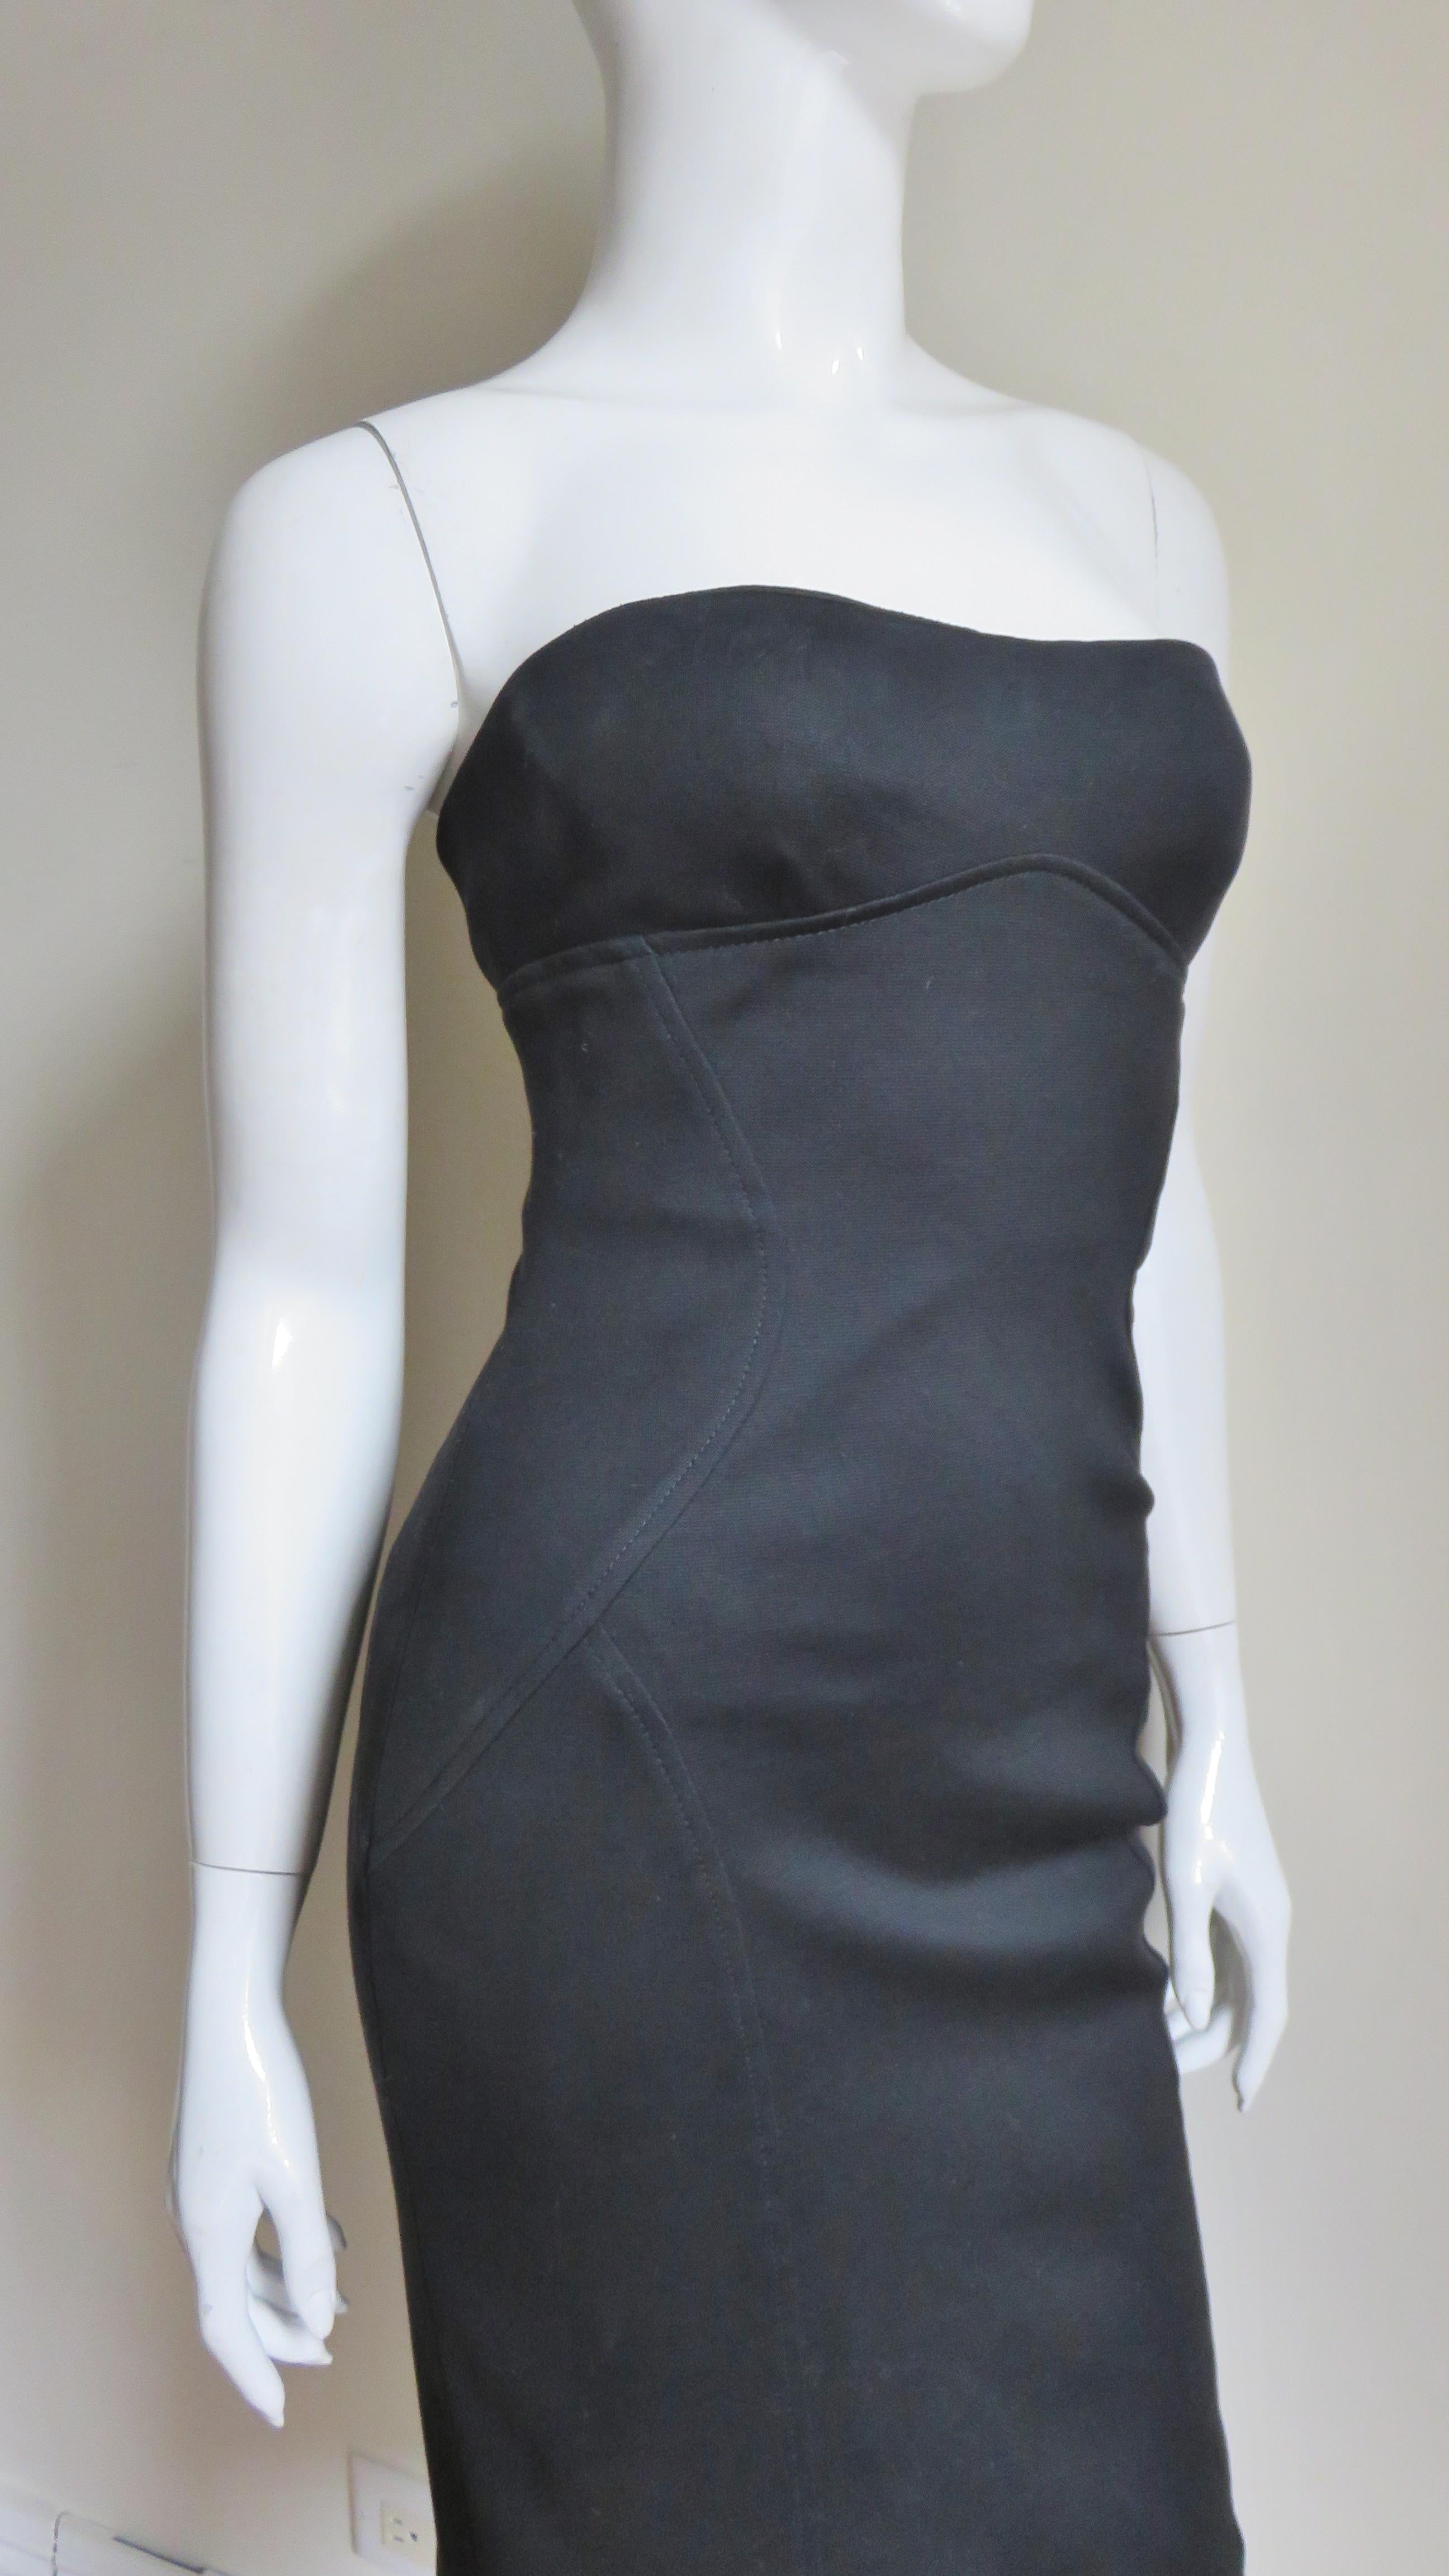 Gianni Versace New Strapless Lace Up Dress In New Condition For Sale In Water Mill, NY